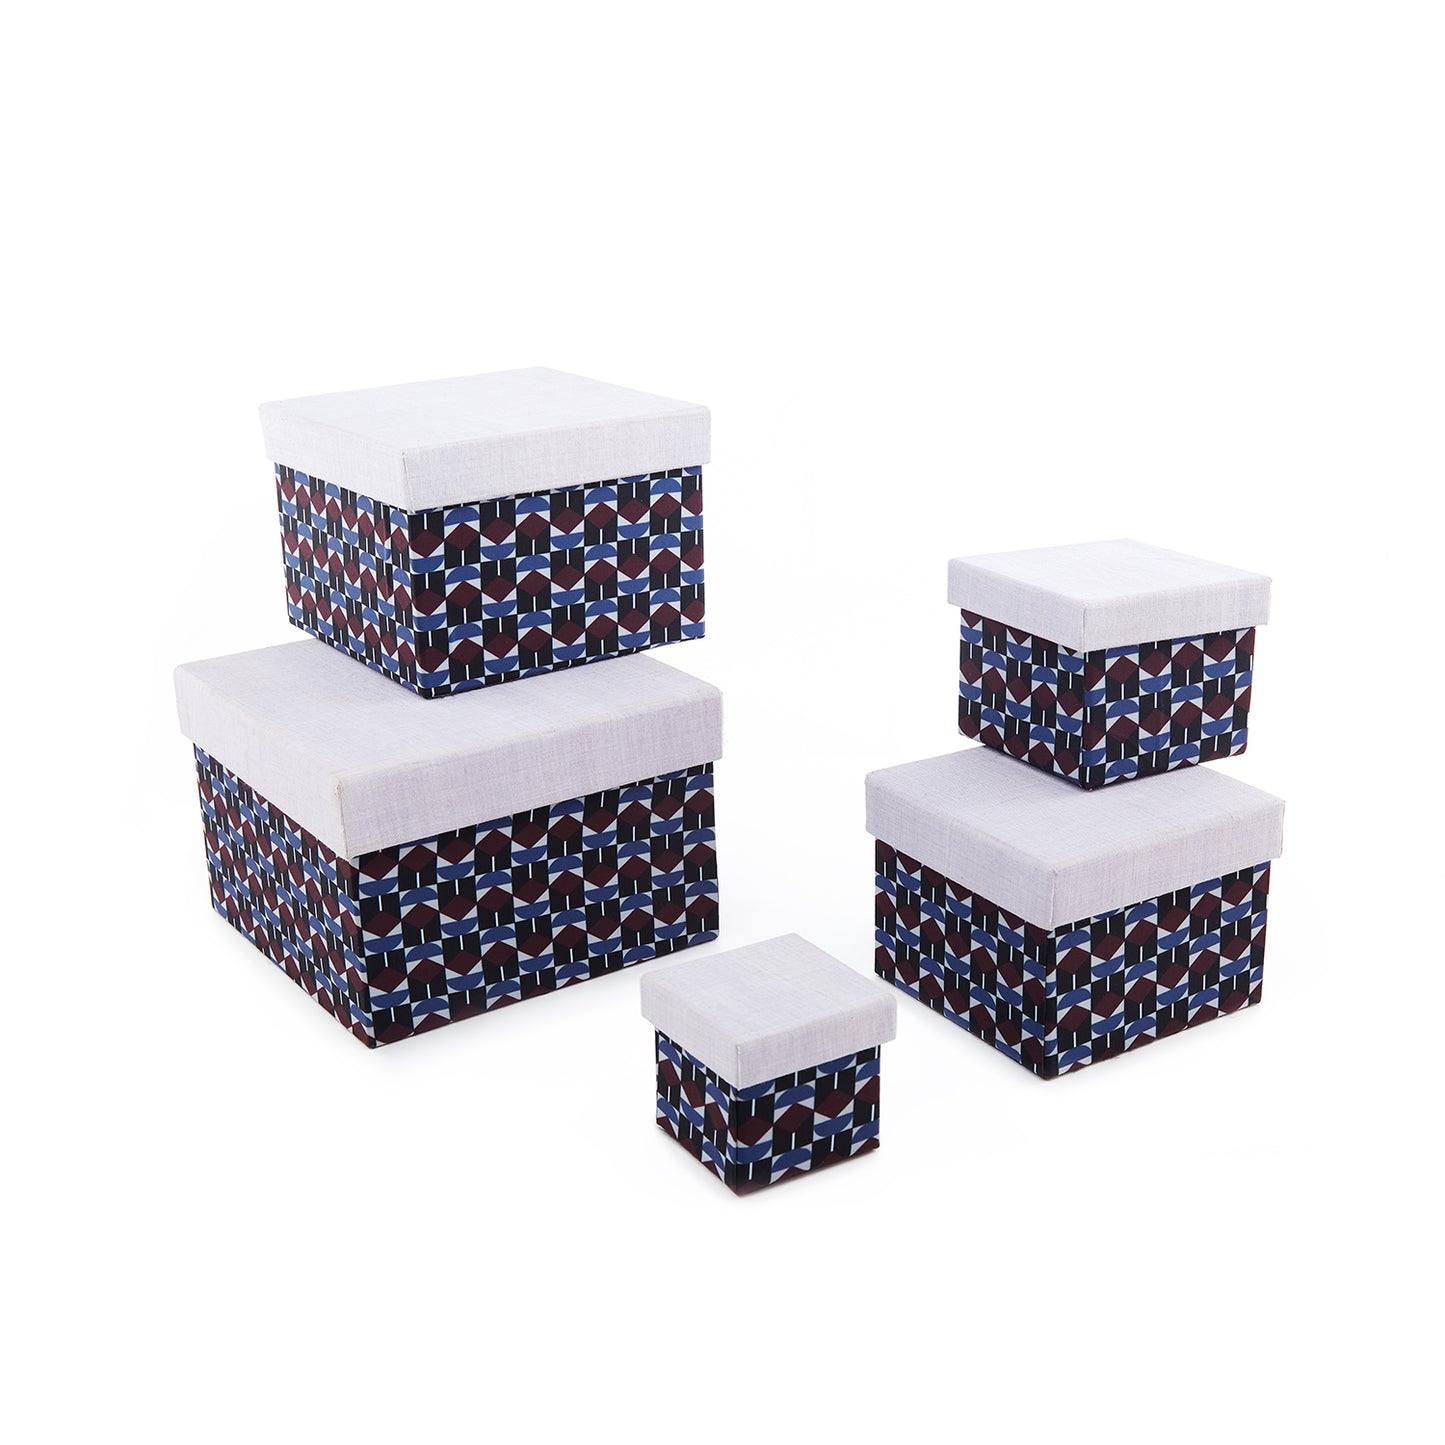 Canvex on a White - Gift Boxes Set of 5